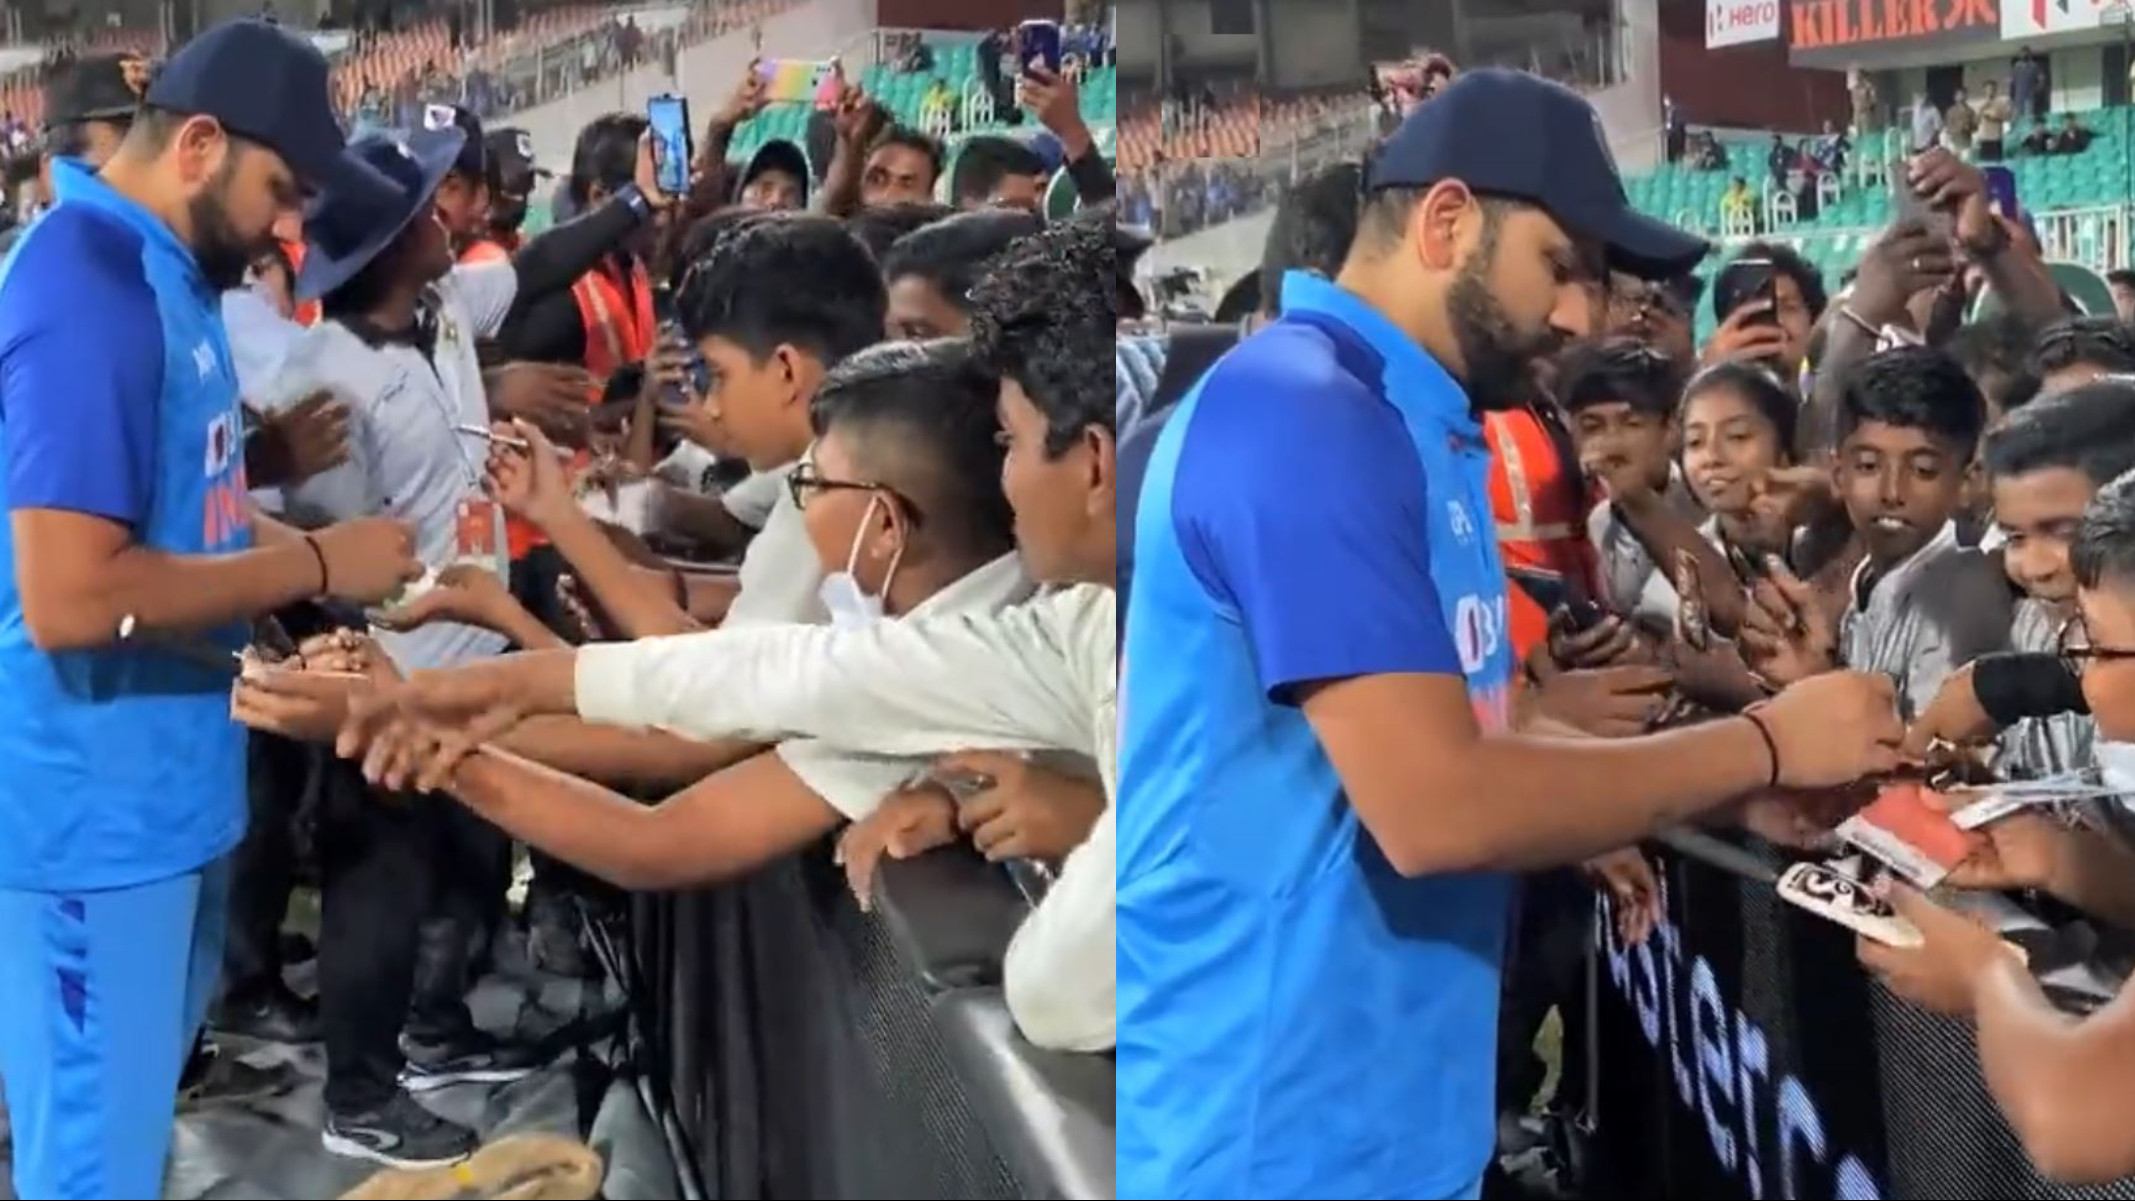 IND V SA 2022: WATCH- Rohit Sharma signs autographs for young fans after India’s win in 1st T20I